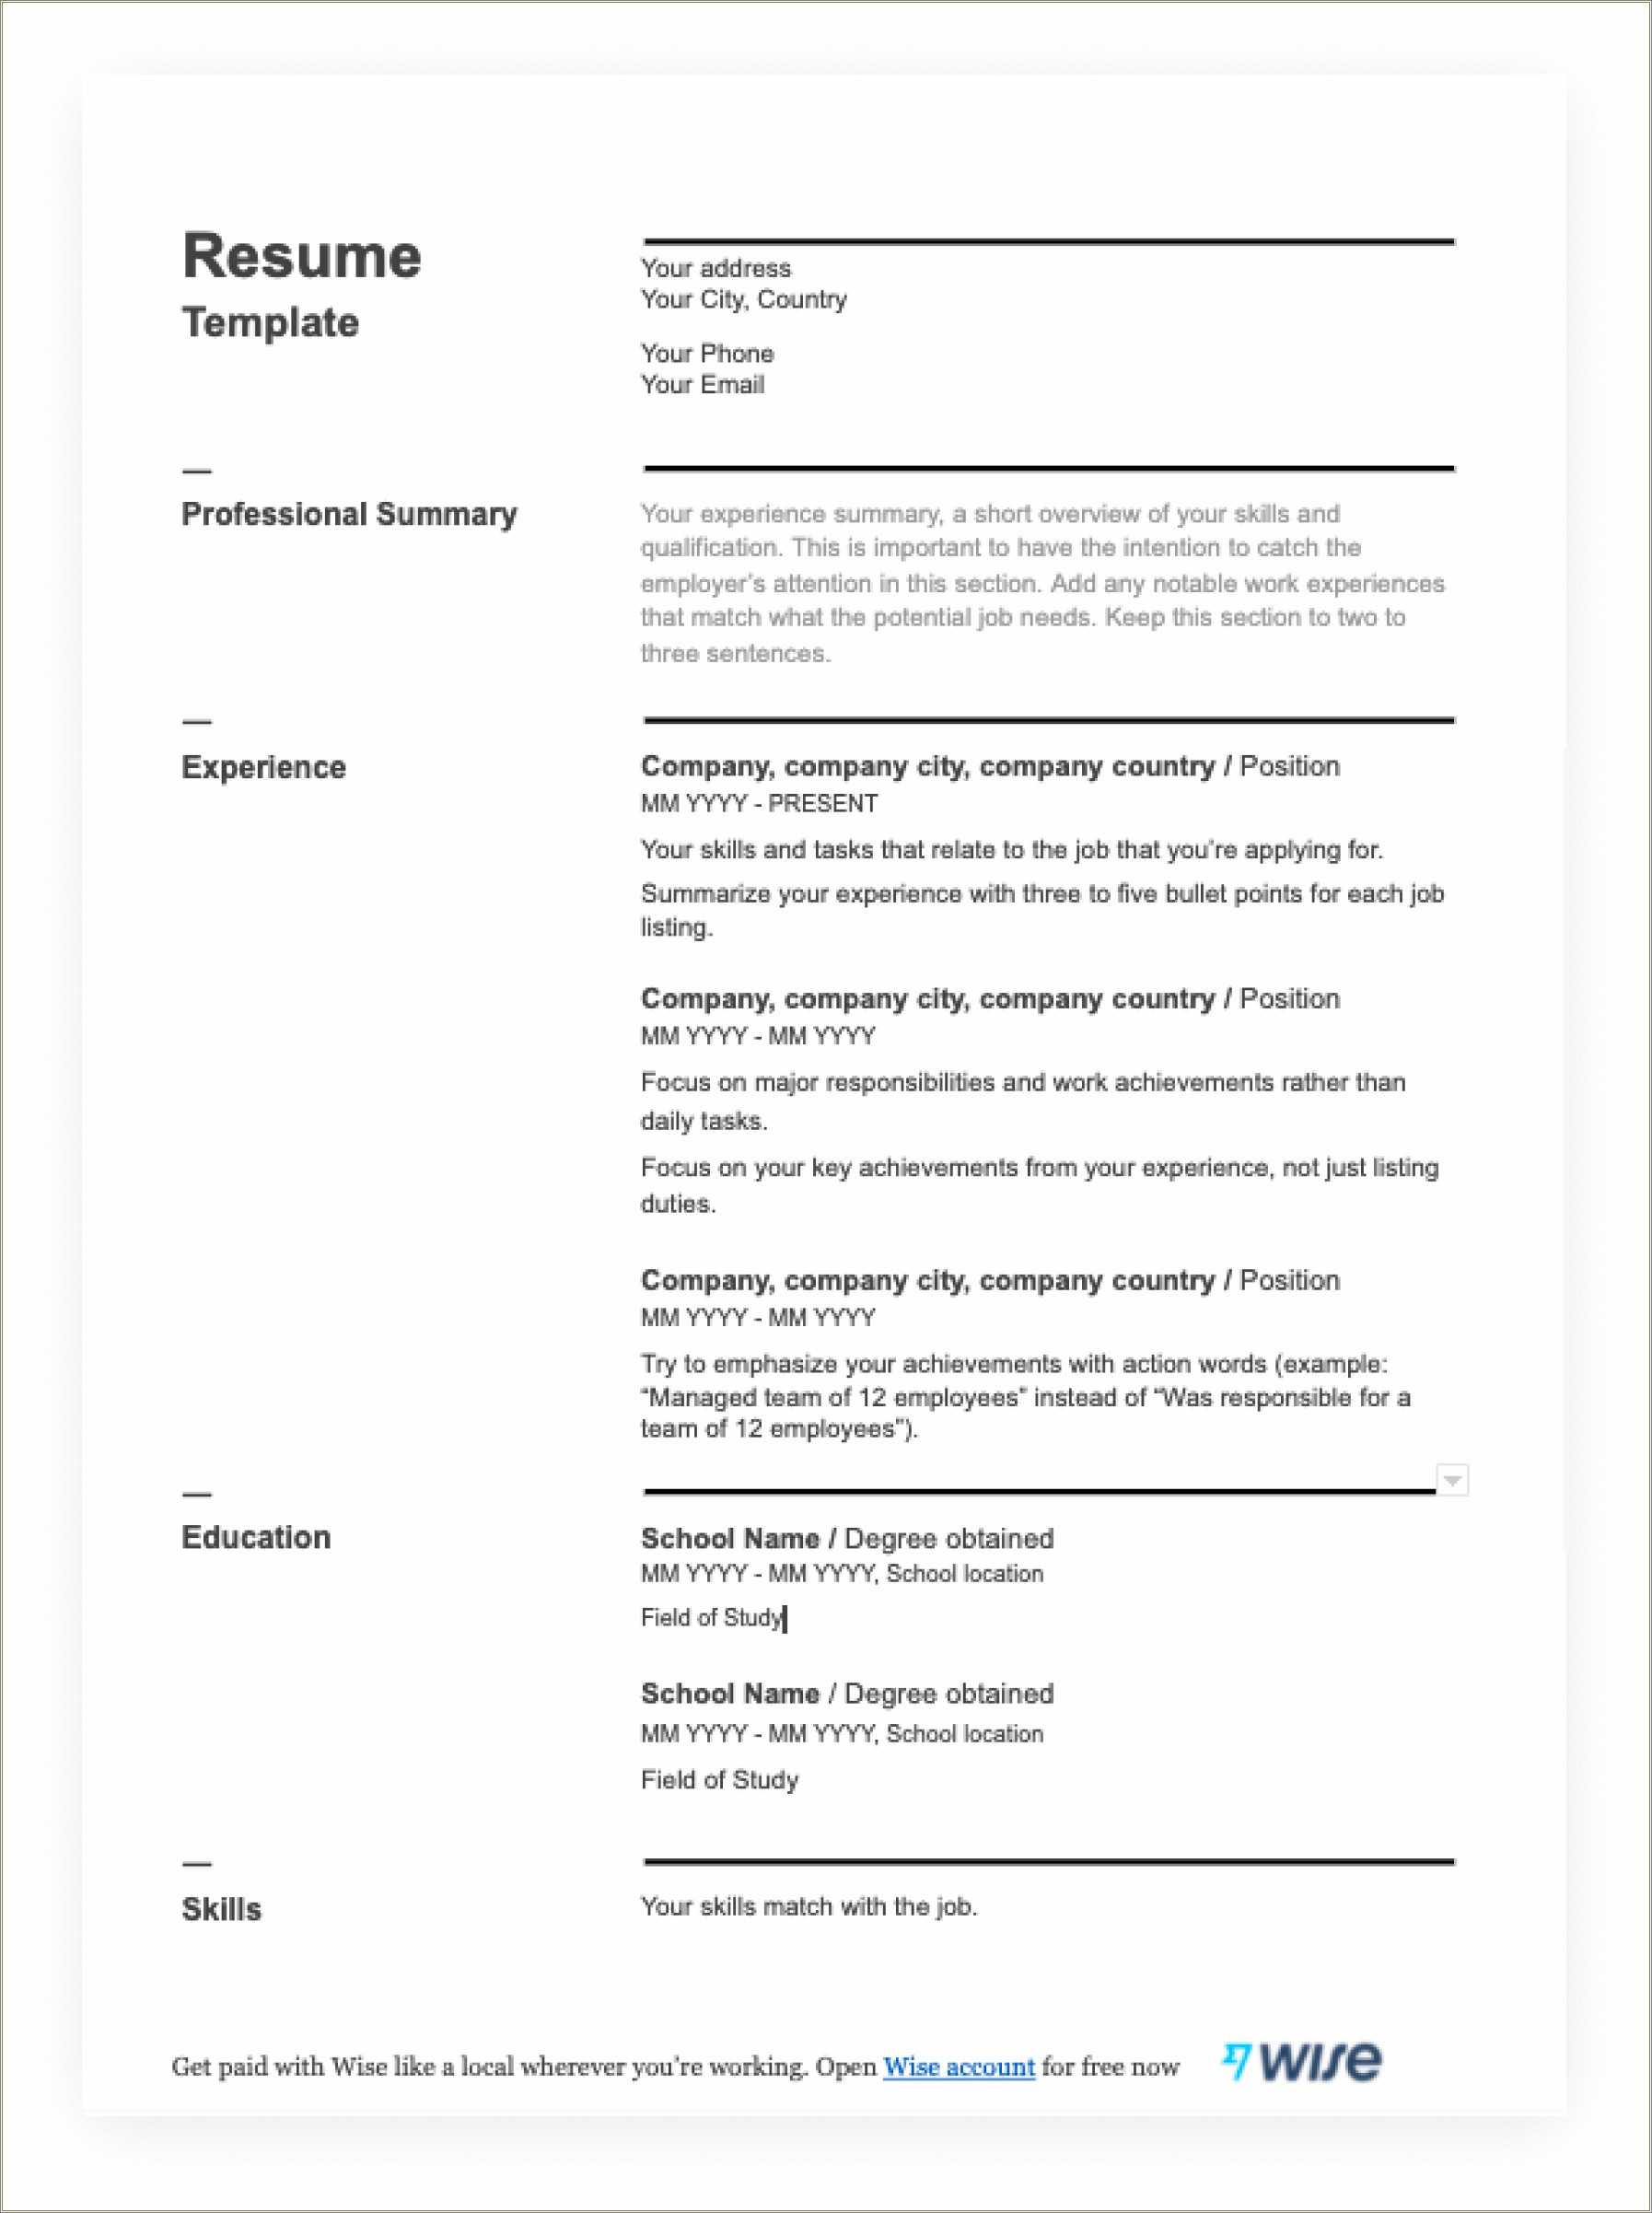 An Example Of A High School Student Resume